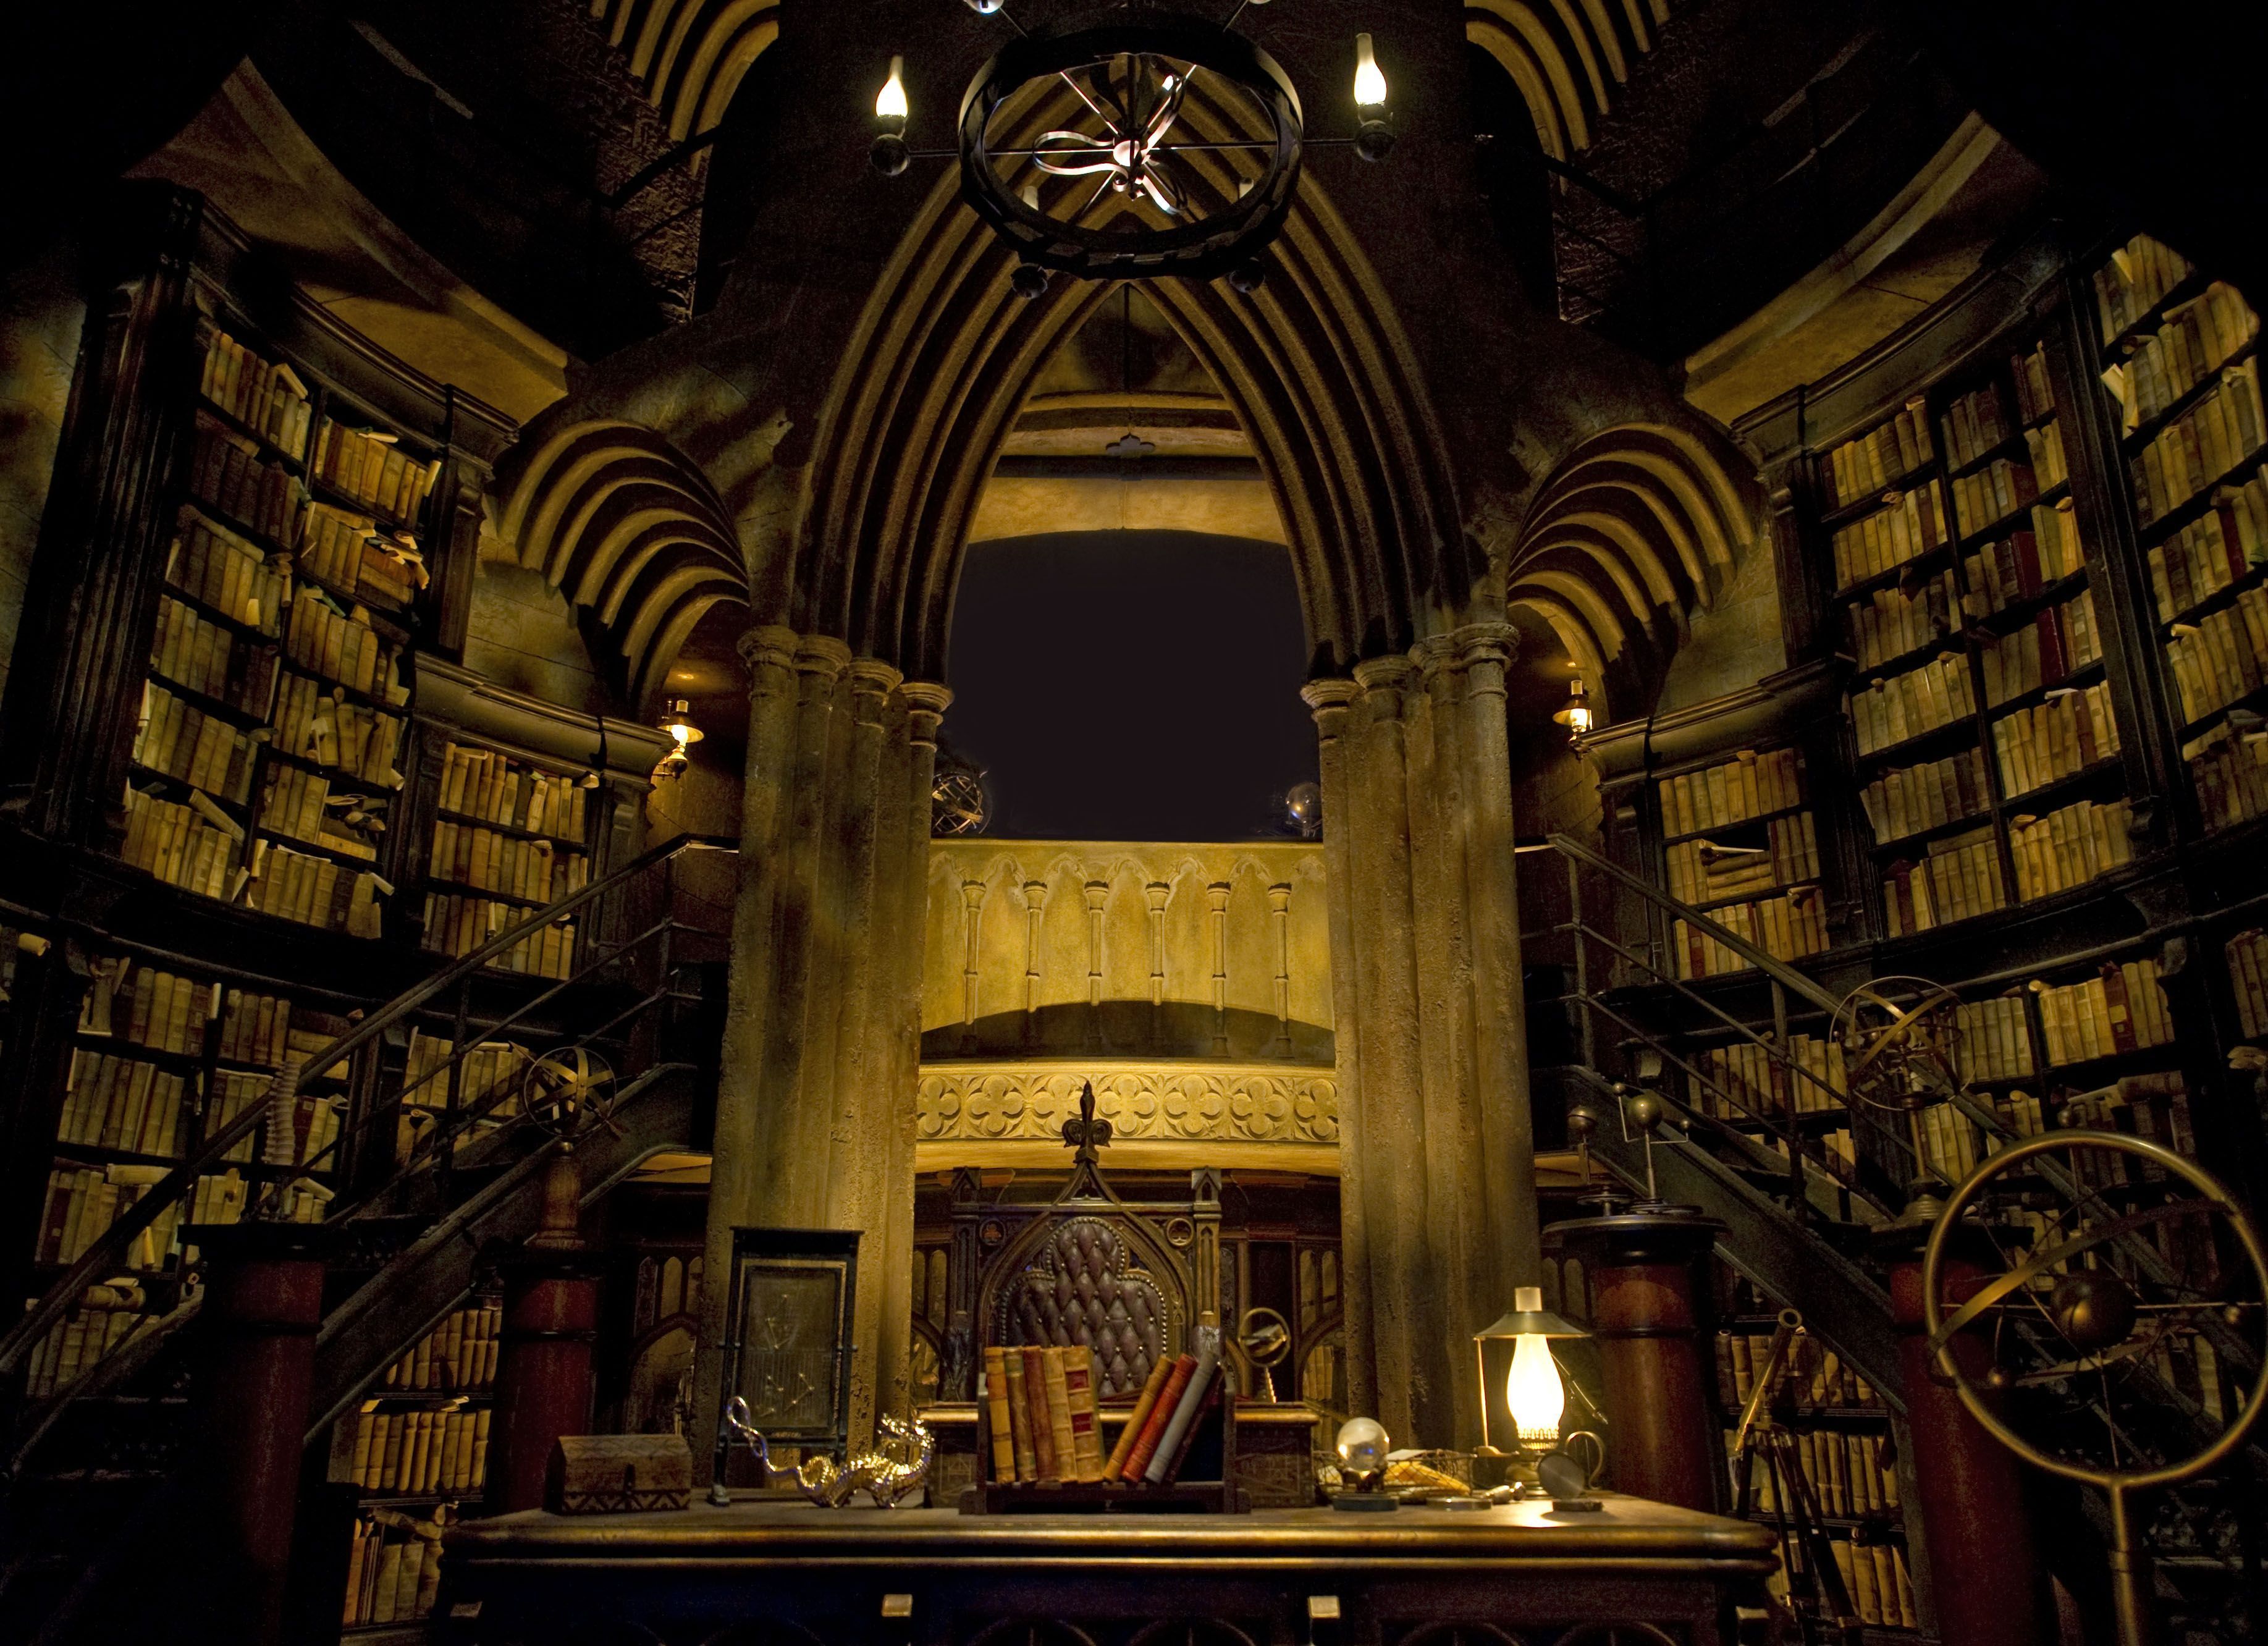 The interior of the library is dark and filled with books. - Library, steampunk